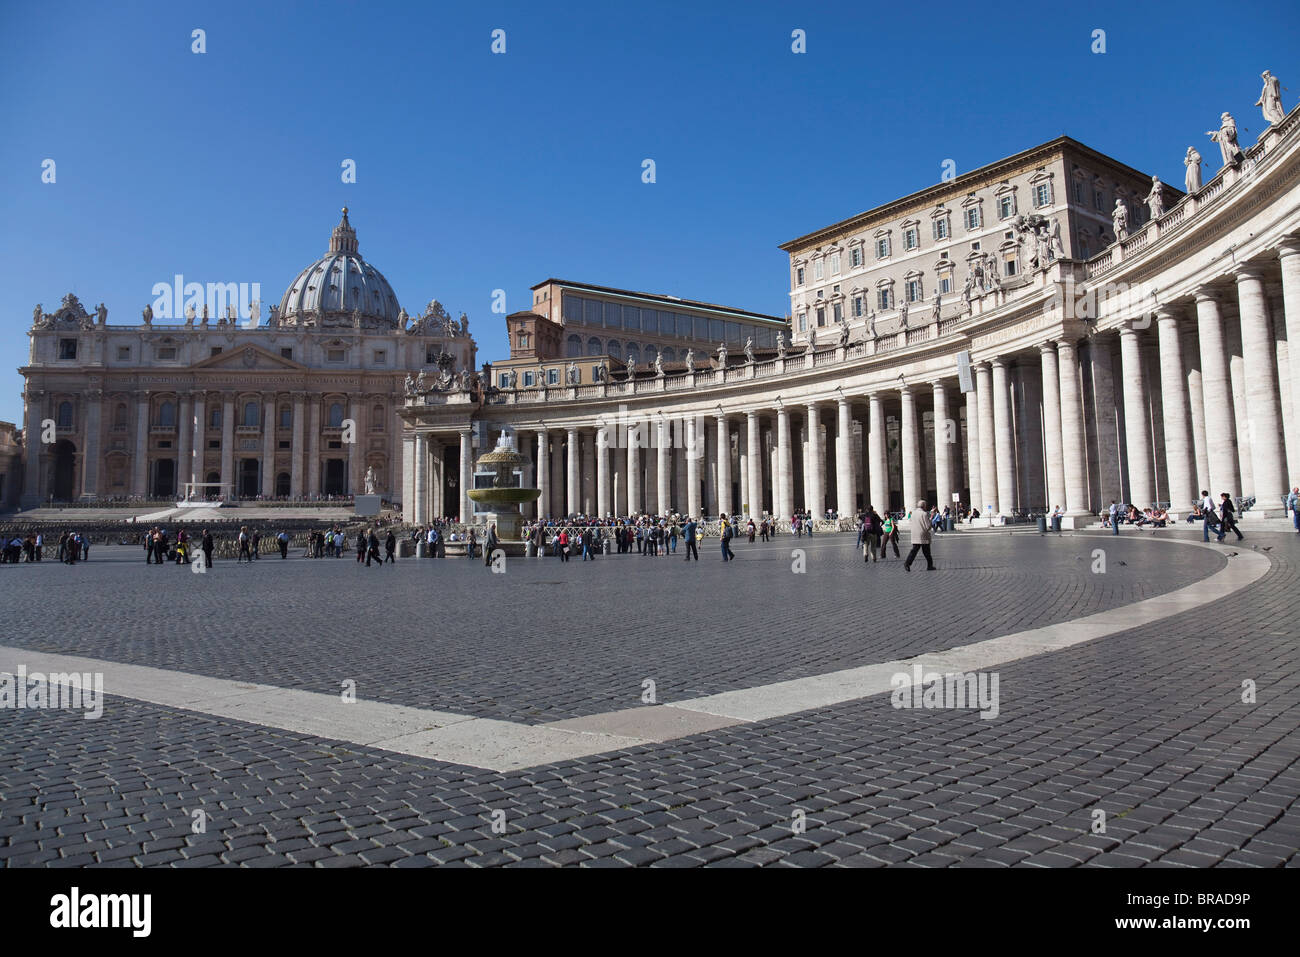 St. Peter's basilica and curved row of columns in Piazza San Pietro, Vatican City, Rome, Lazio, Italy, Europe Stock Photo